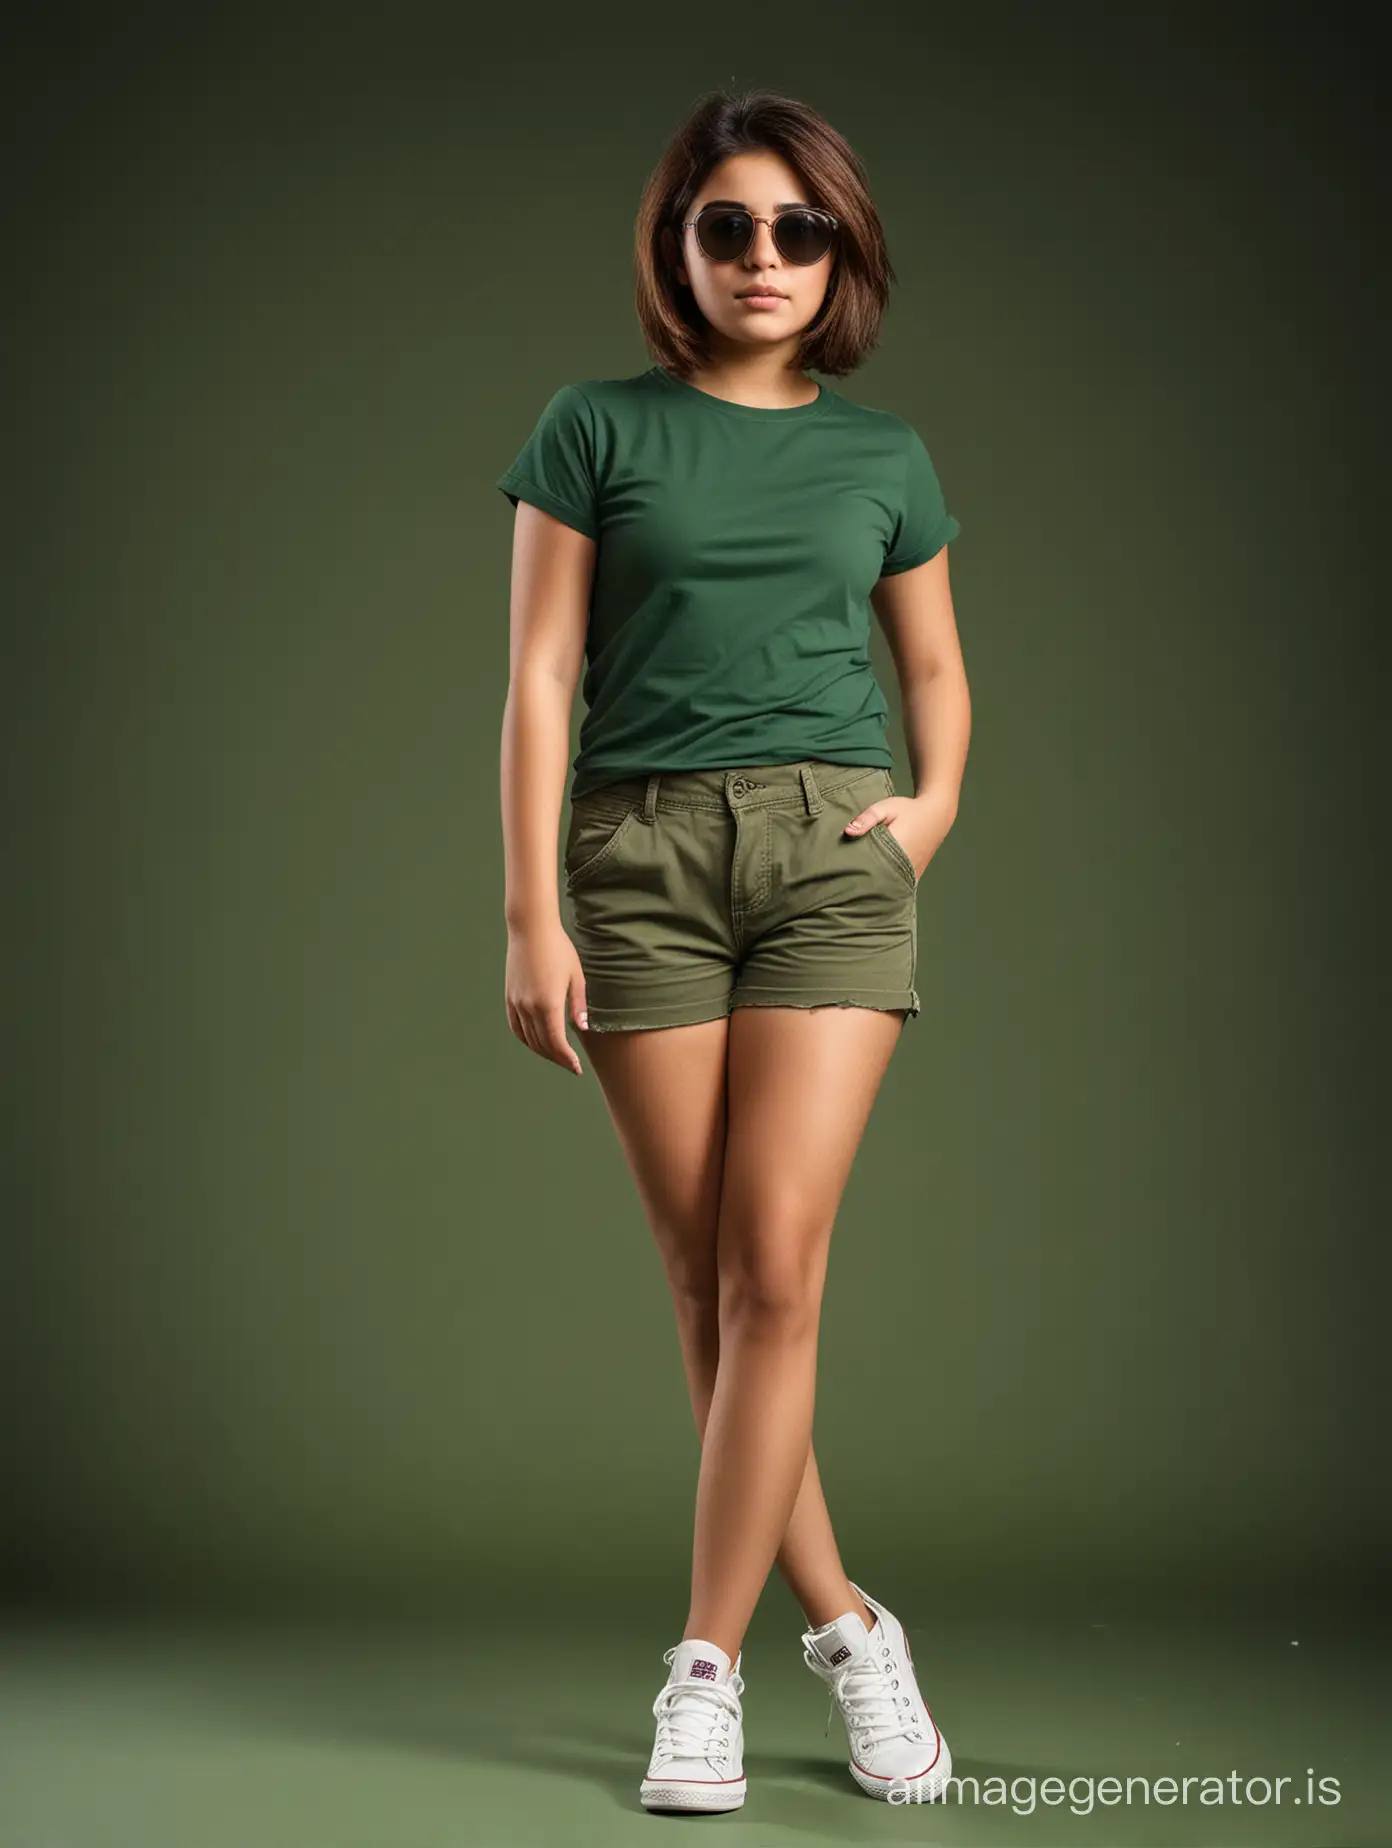 Charming-Iranian-Teen-in-Green-Outfit-and-Sunglasses-on-Fantasy-Cream-Background